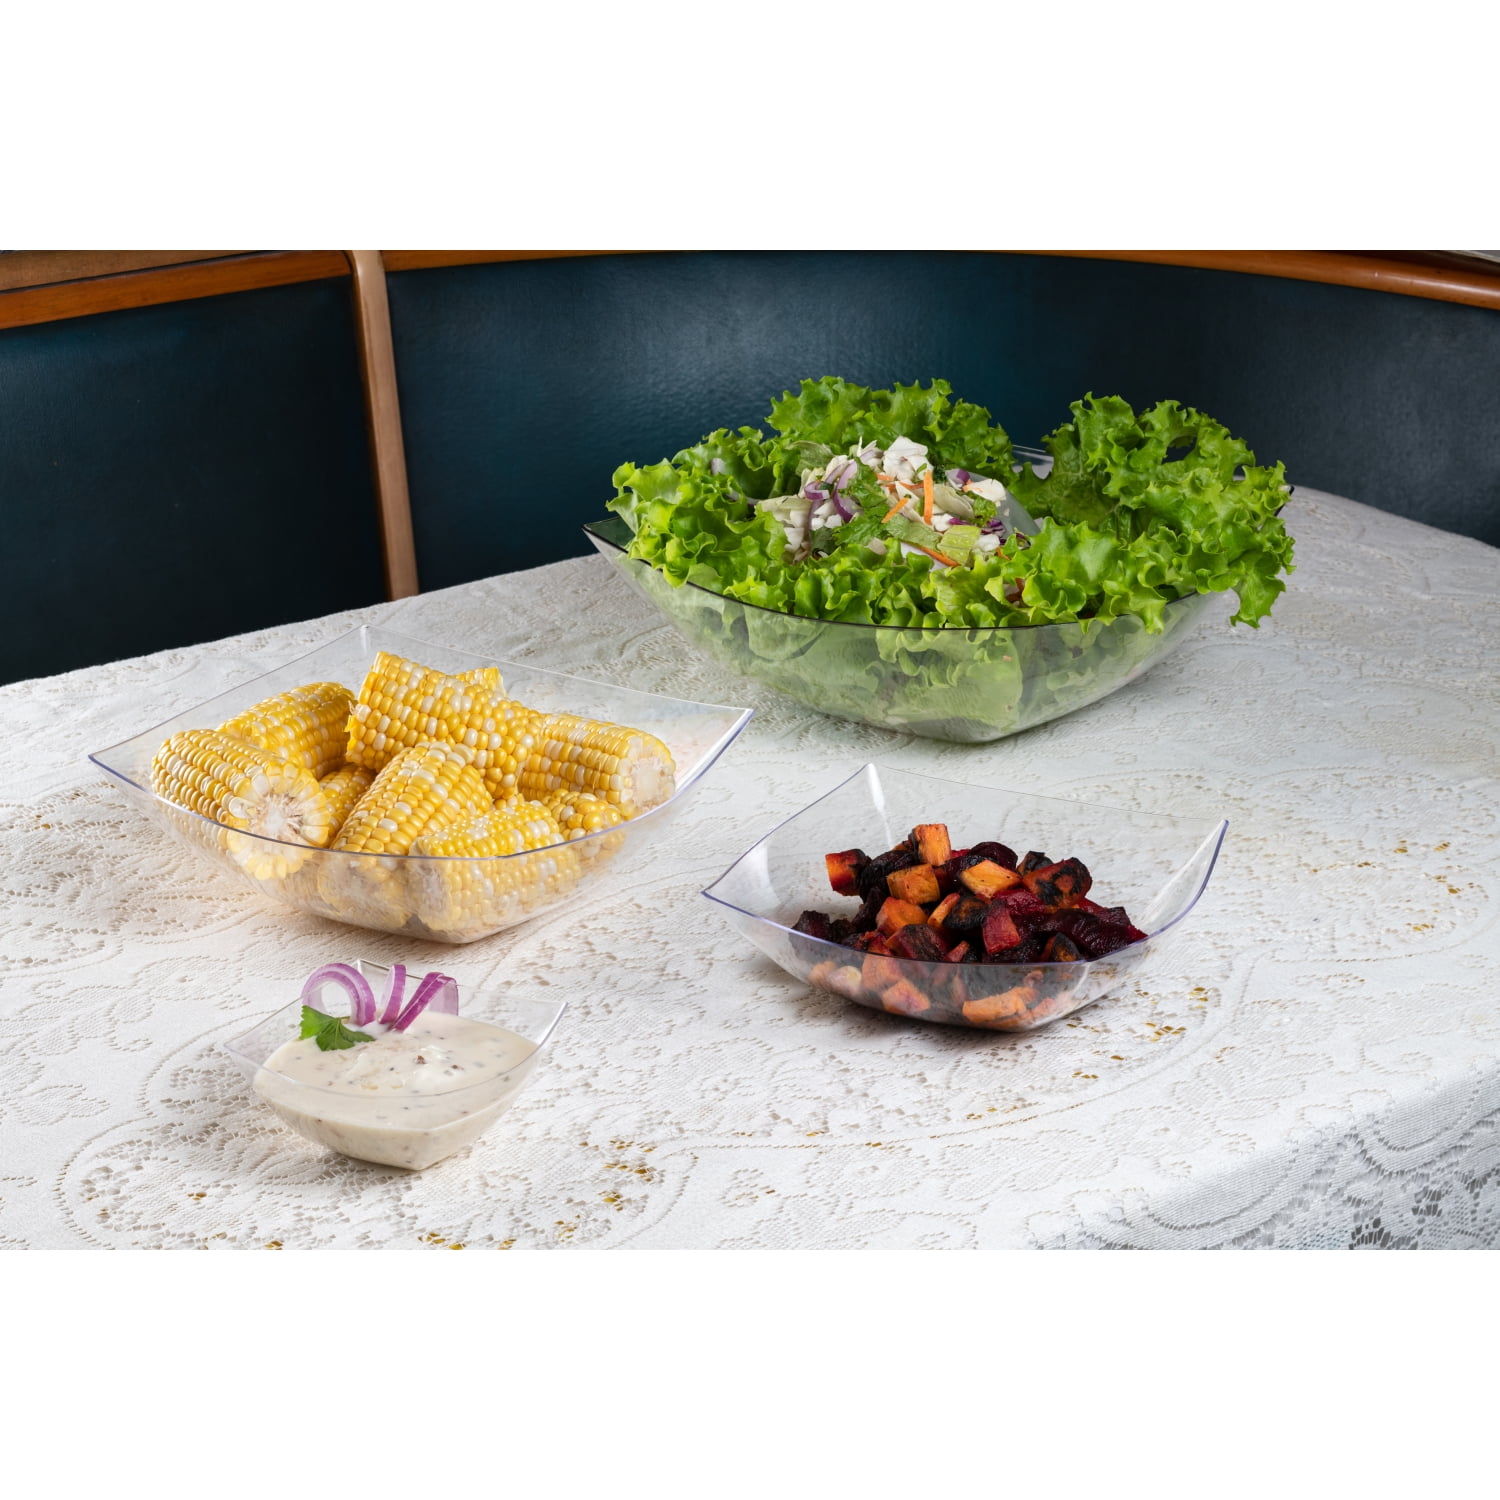 Clear Salad Bowl With Lids - 3 Count – Posh Setting